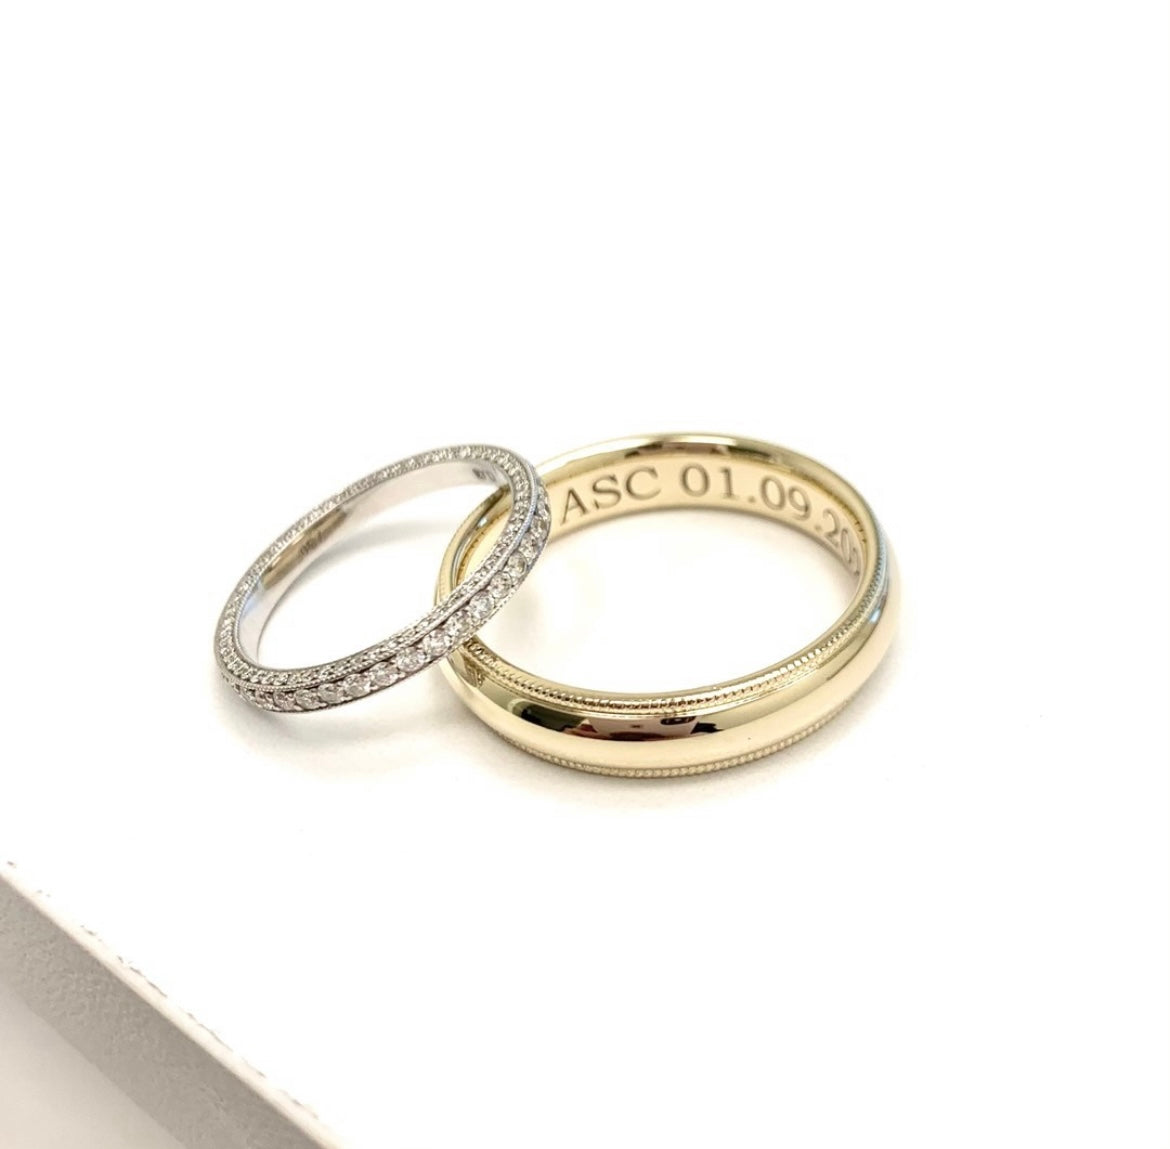 Wedding rings in white gold and yellow gold Pittsburgh